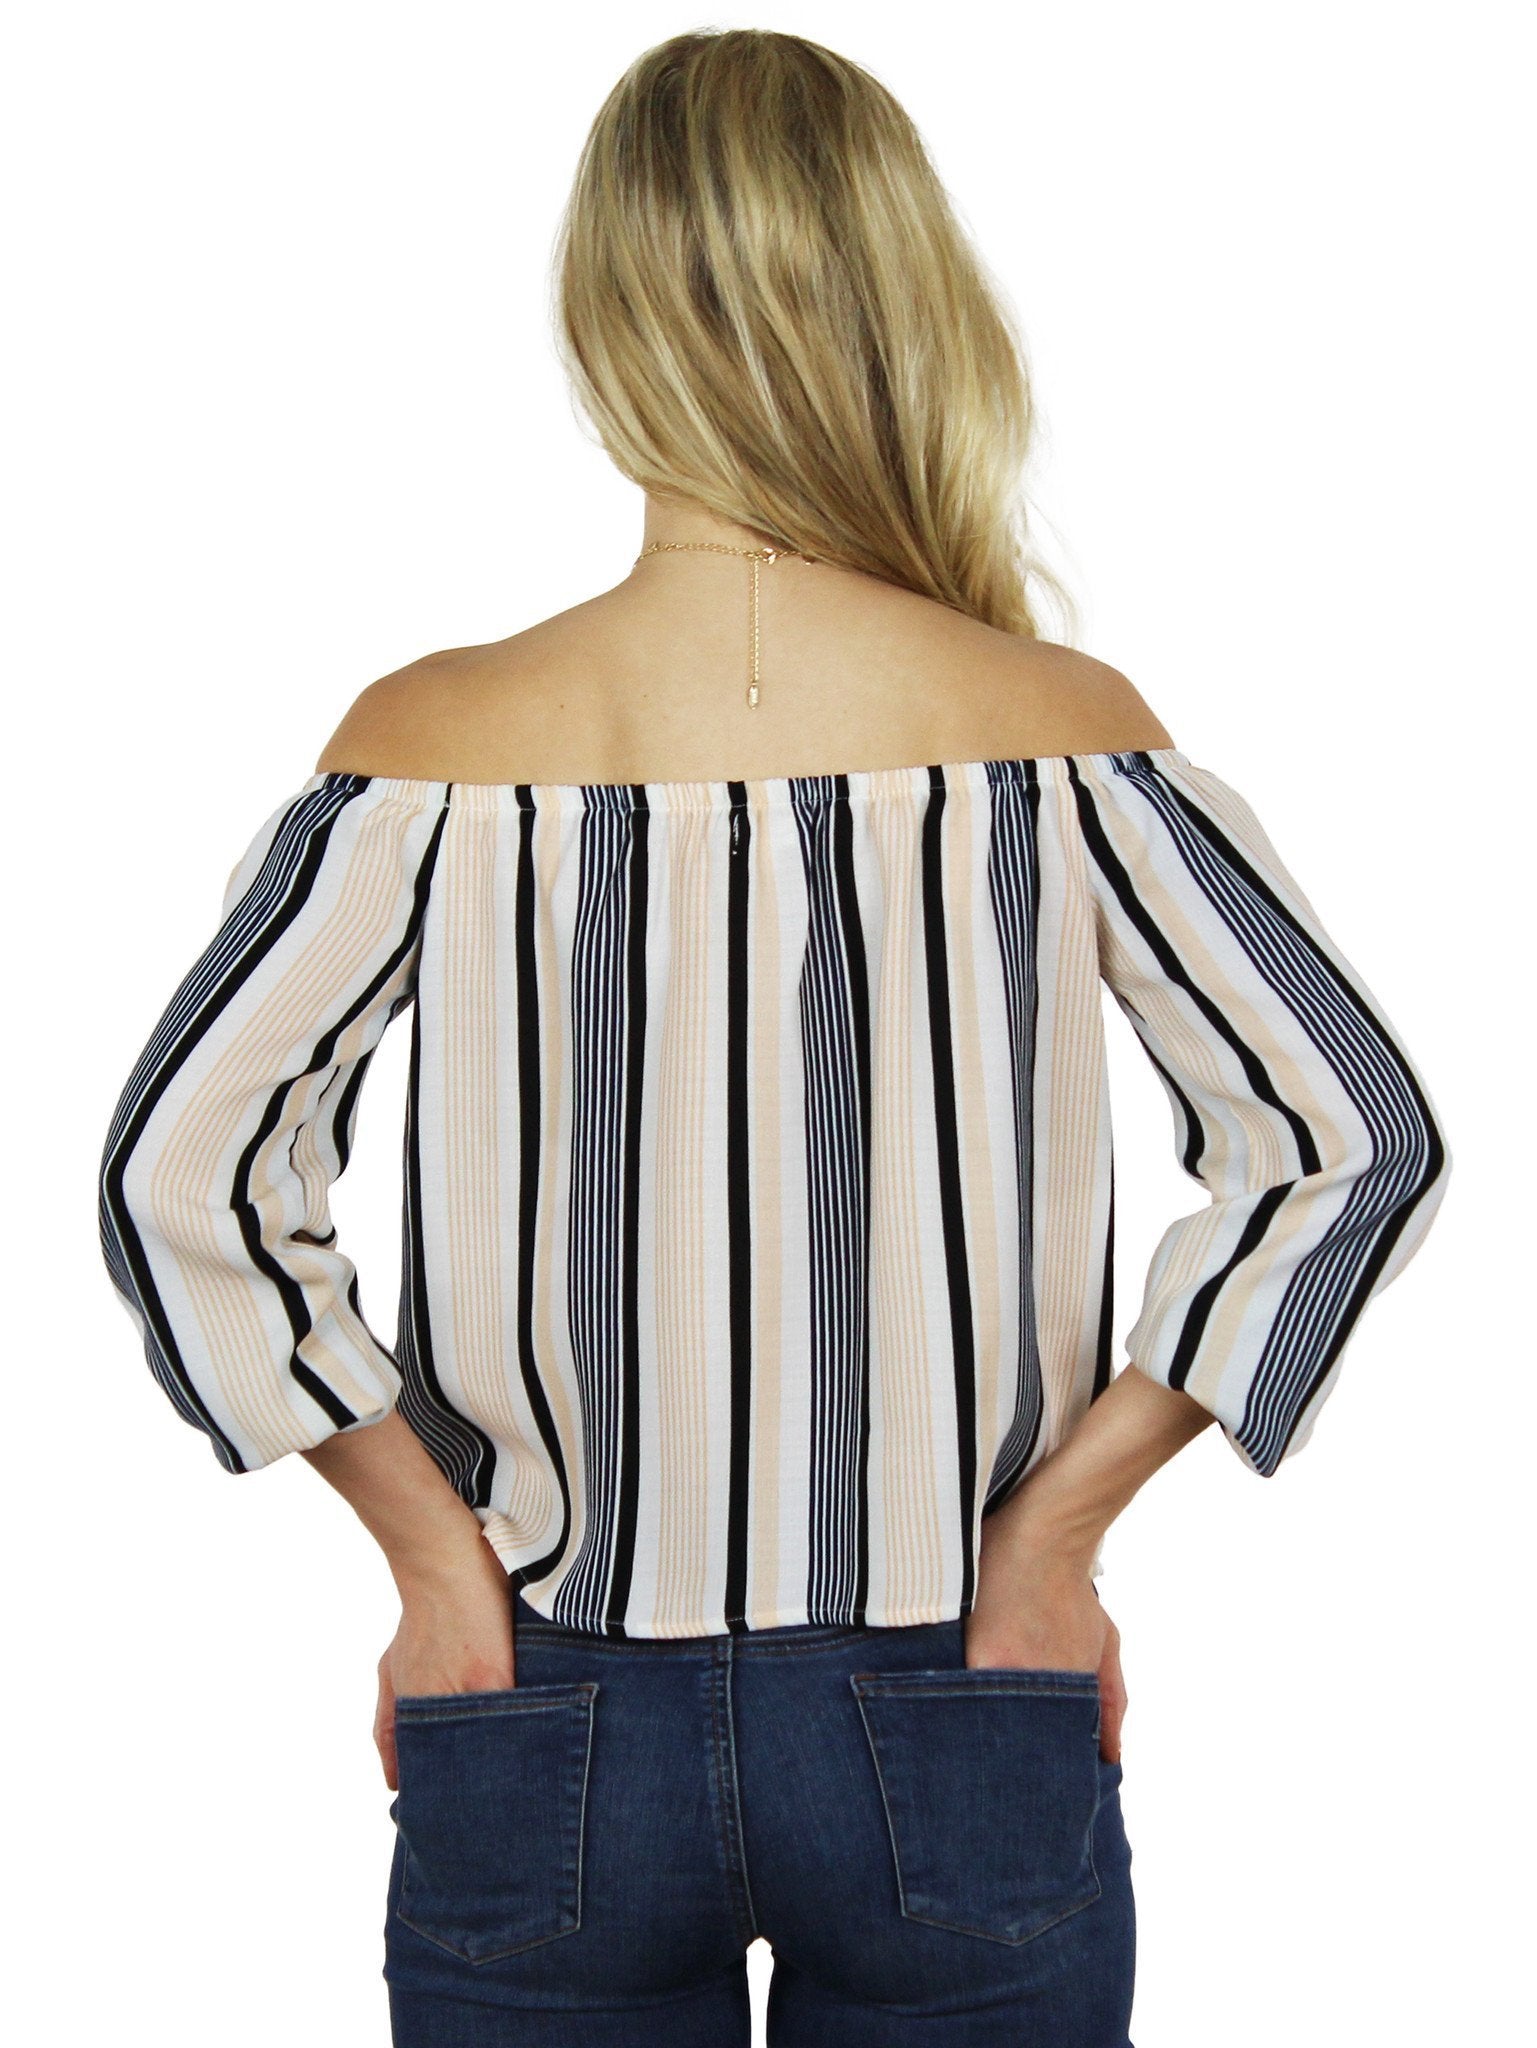 Women wearing a top rental from Lucca Couture called Stripes Are The New Black Blouse